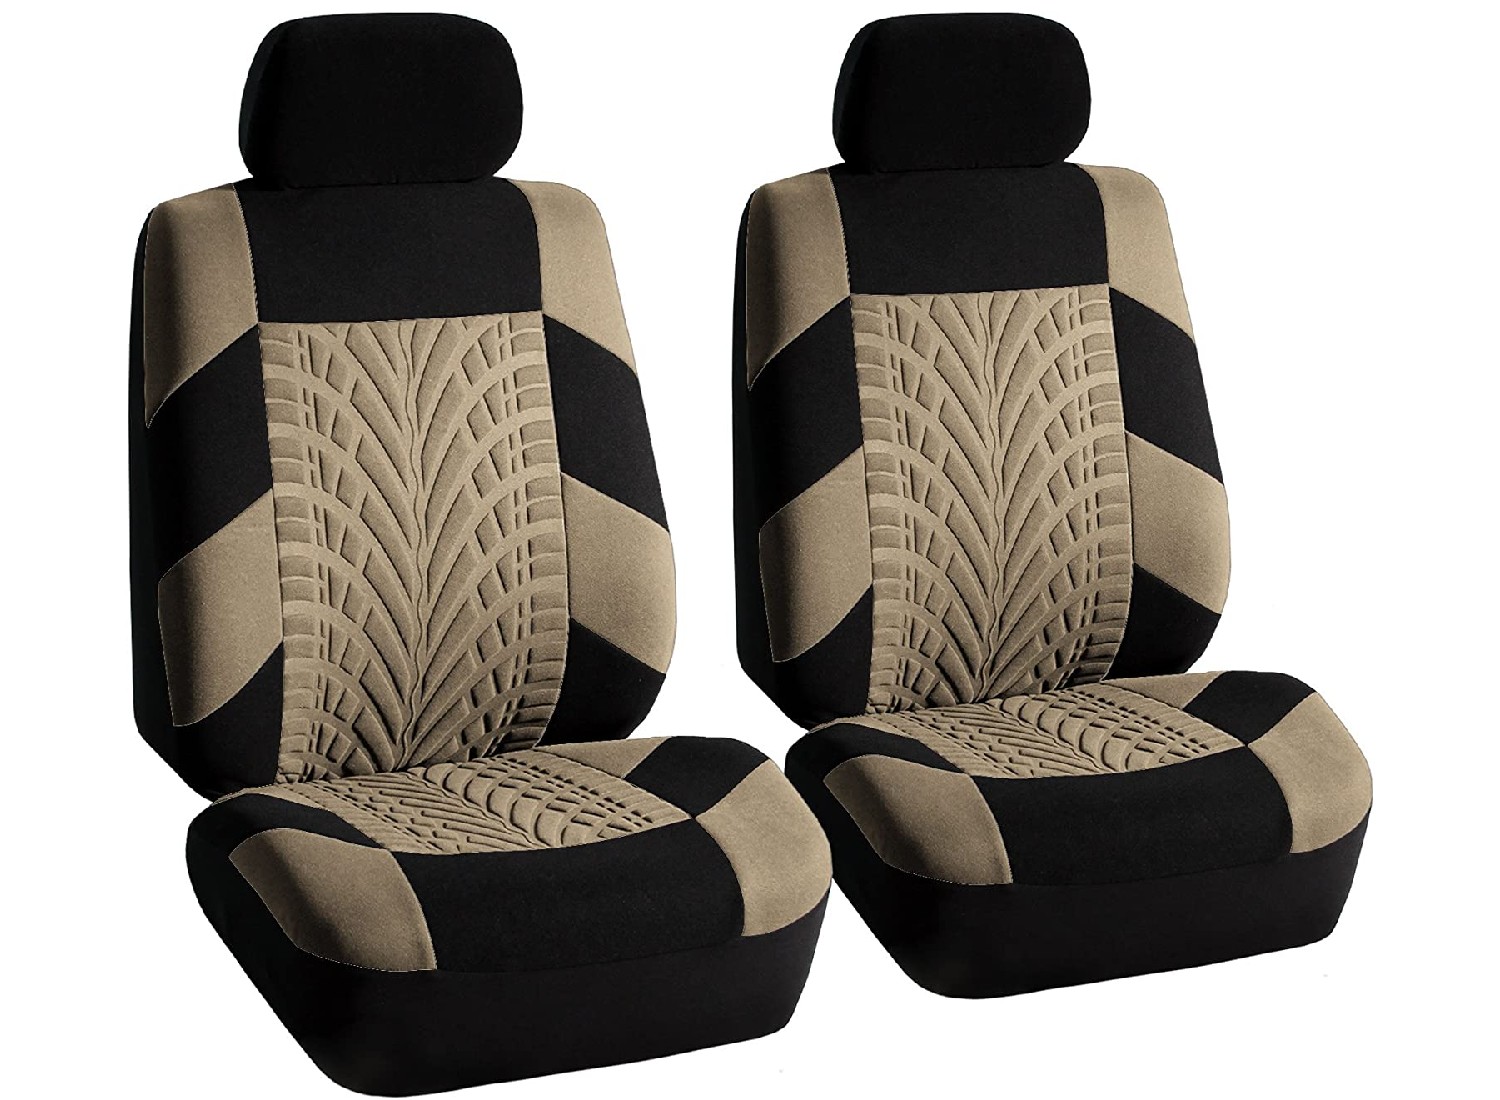 https://www.oldcarsweekly.com/review/wp-content/uploads/2022/10/car-seat-covers.jpg